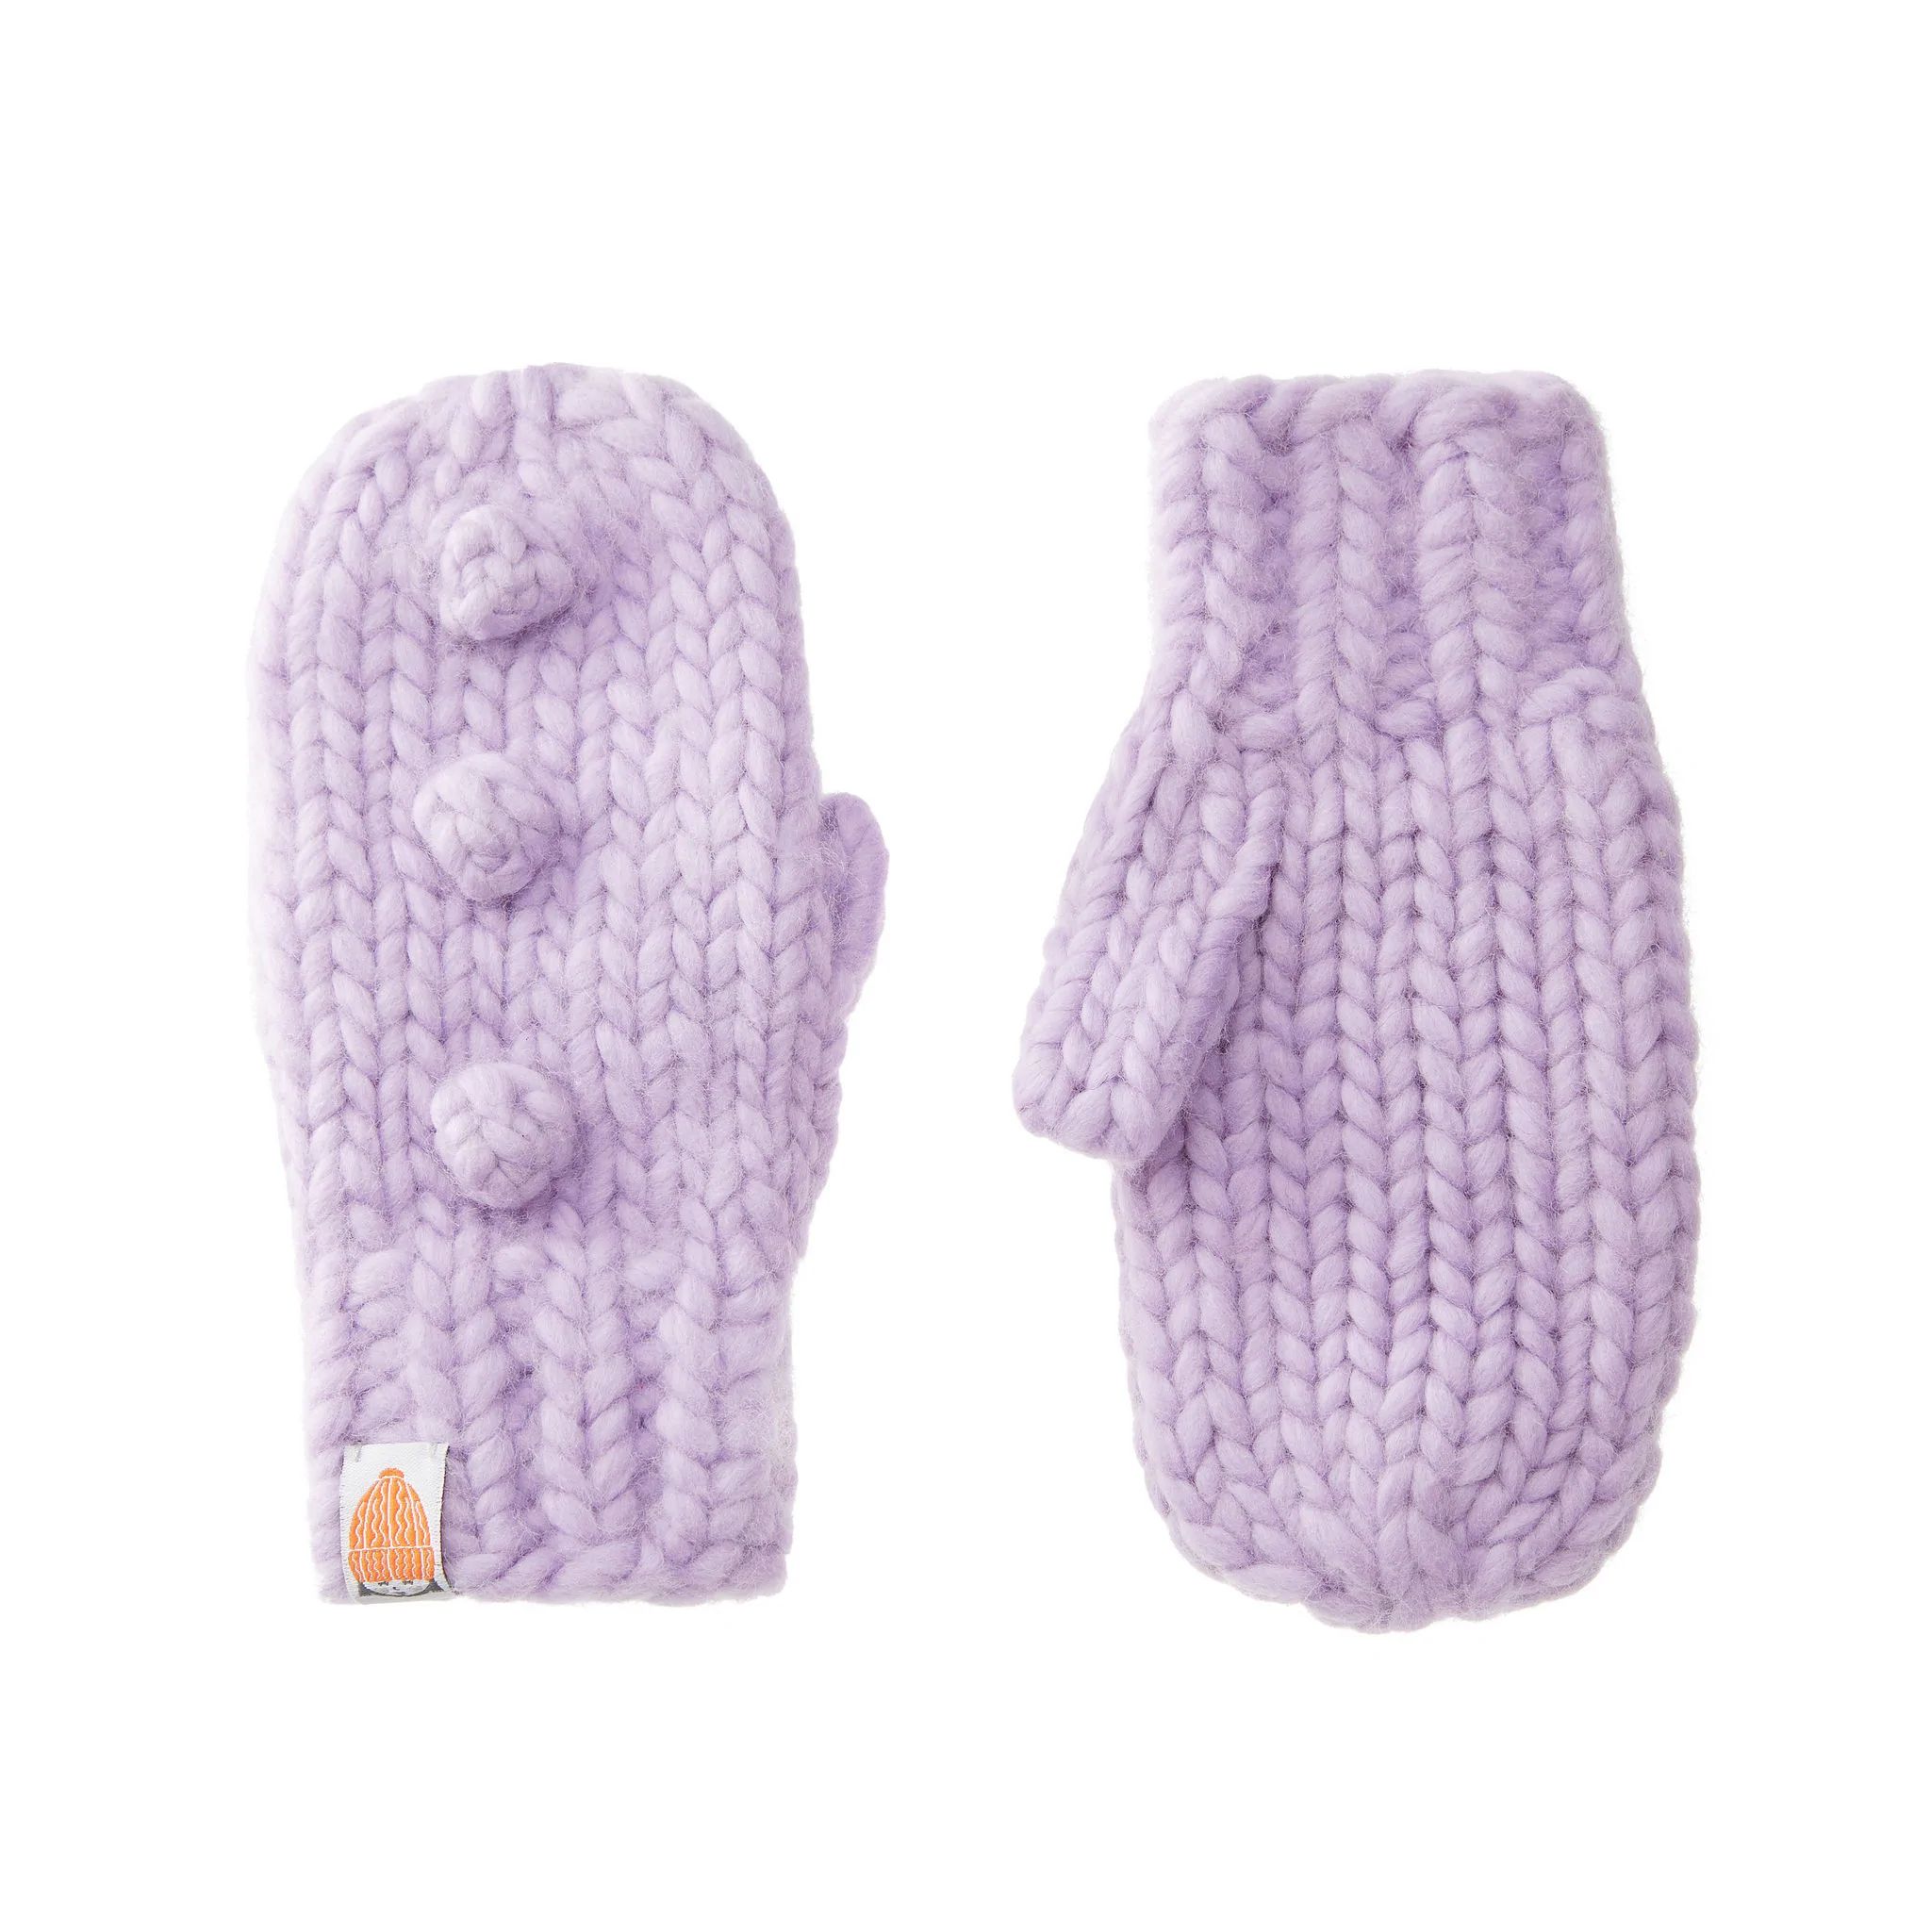 The Lil Campbell Mittens | Sh*t That I Knit